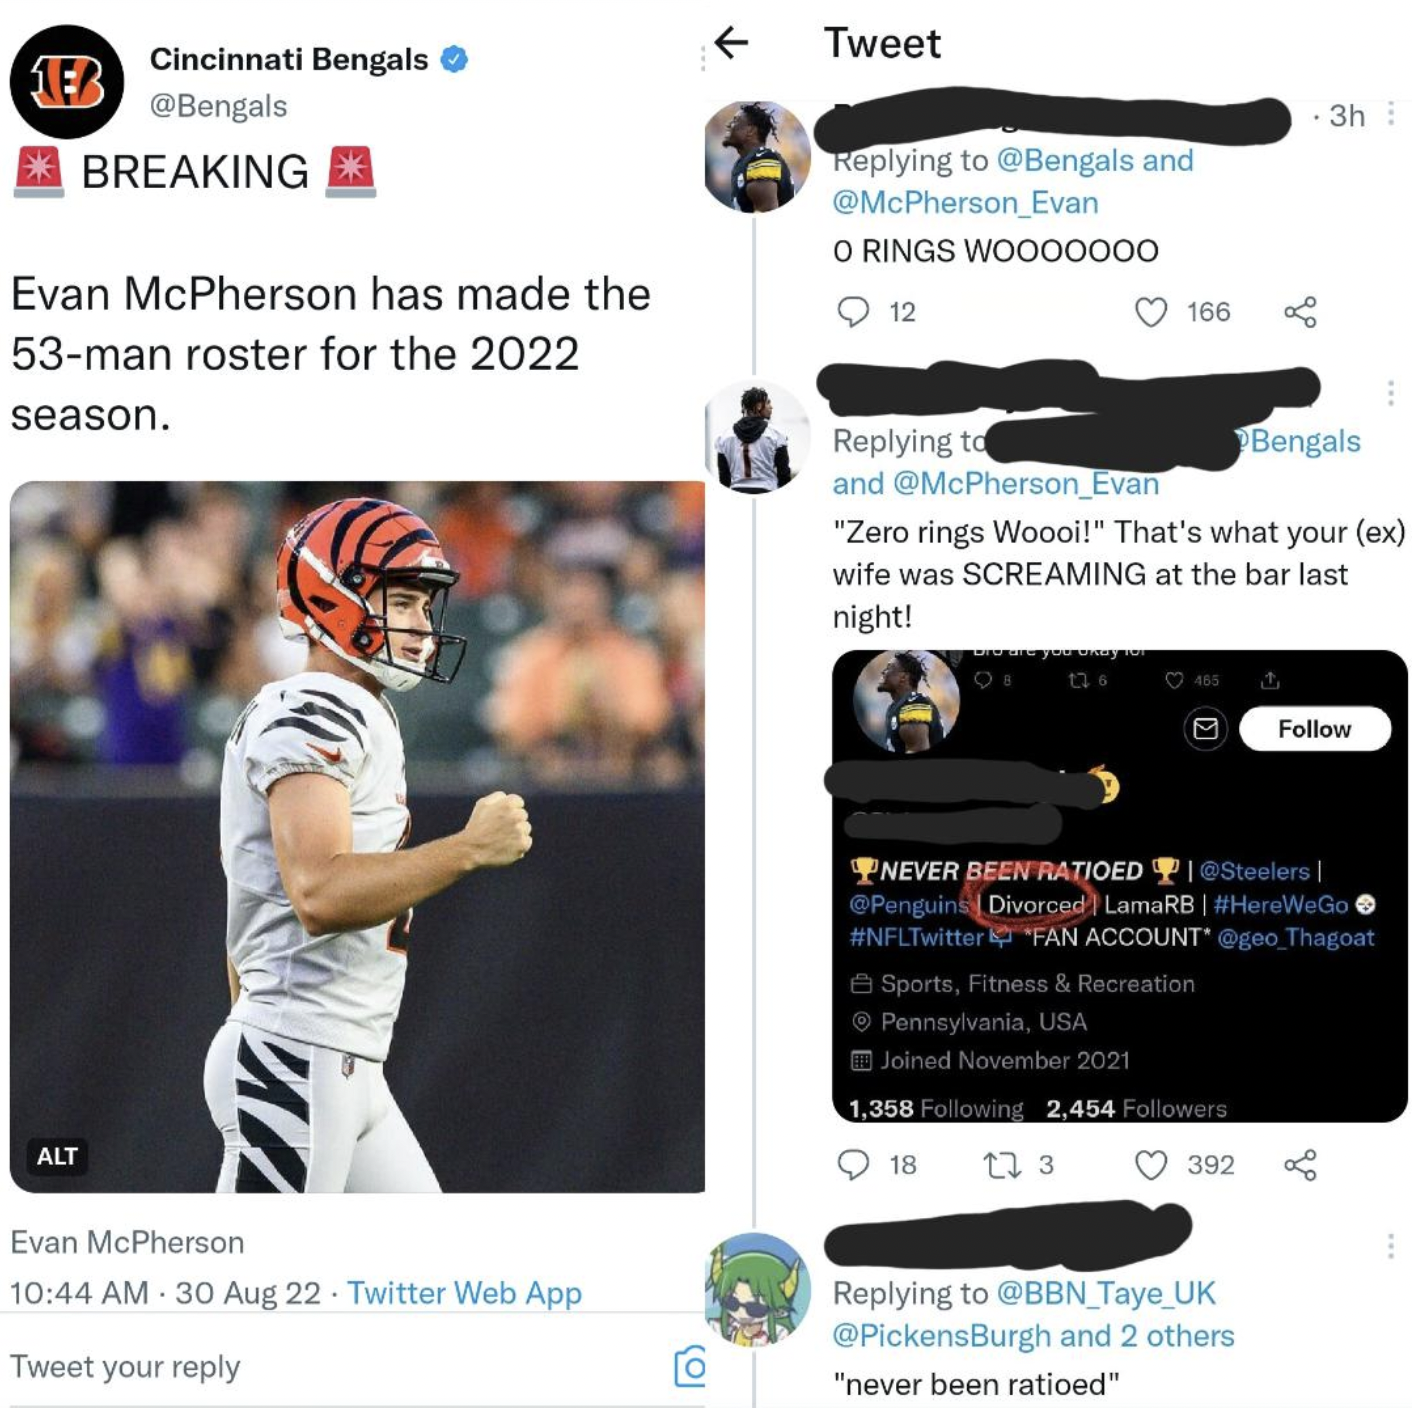 Murdered by Words - Cincinnati Bengals Breaking Eb Evan McPherson has made the 53man roster for the 2022 season.